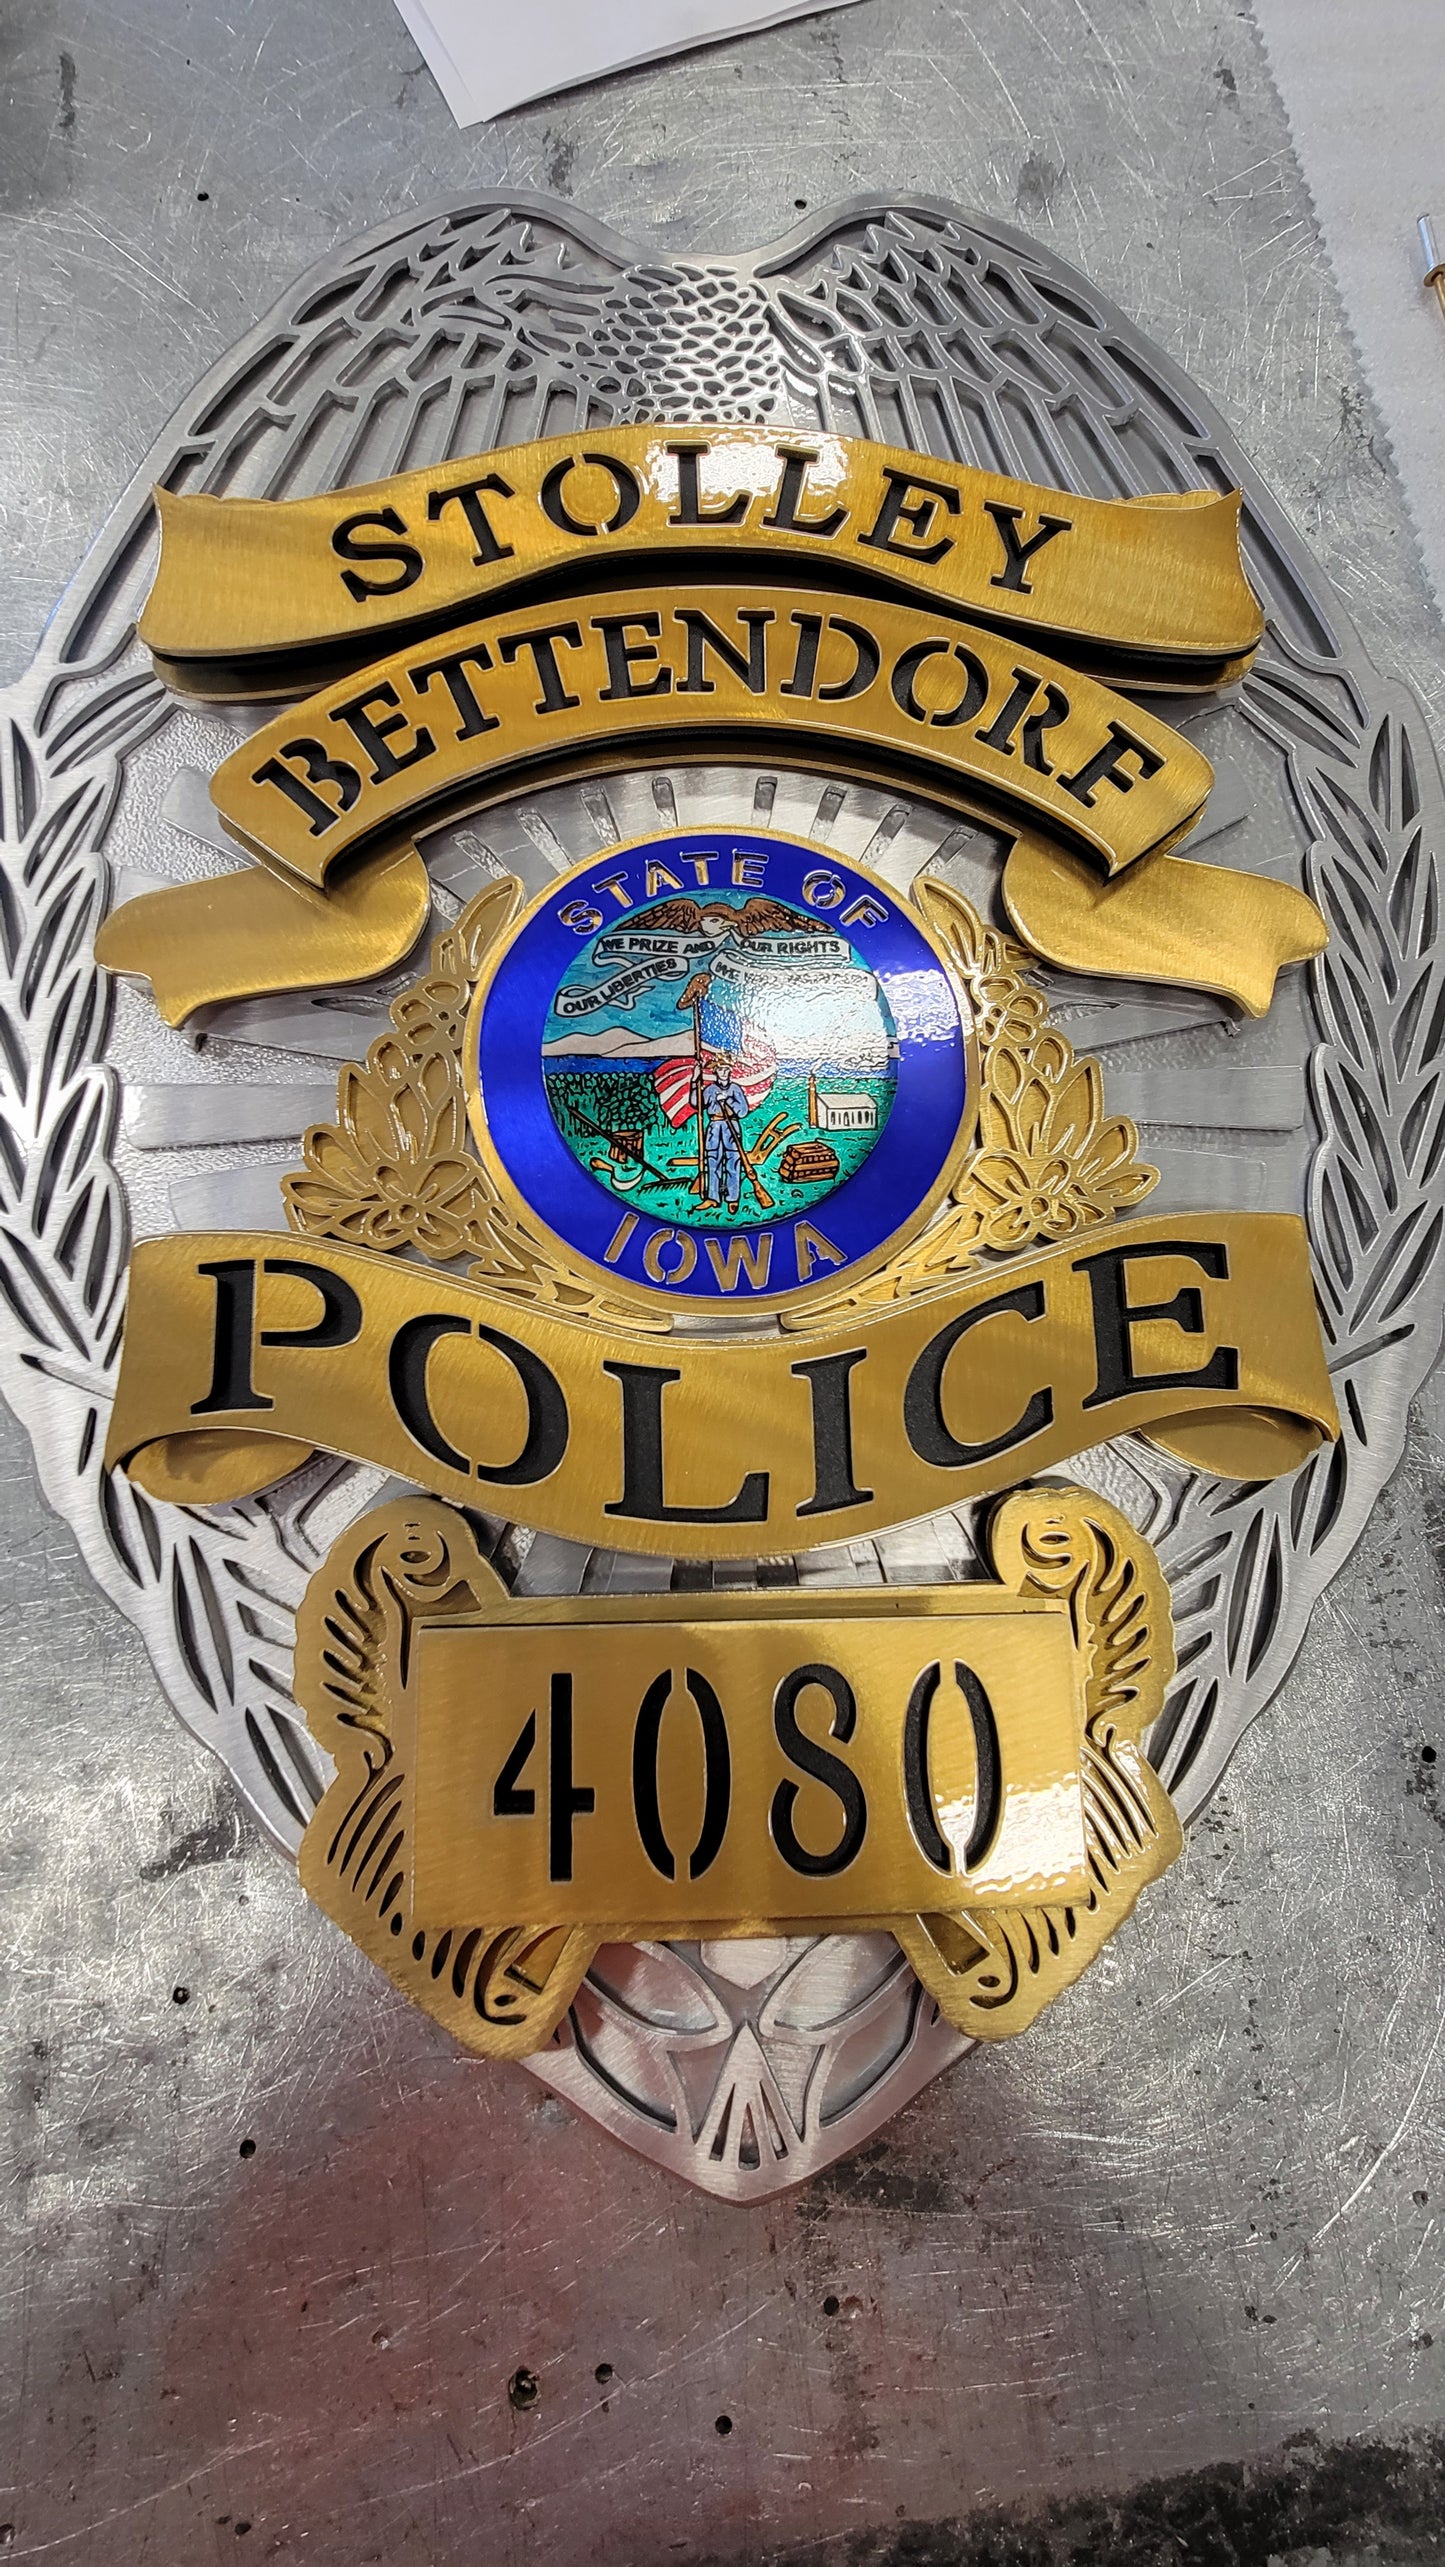 Stolley Bettendorf Police Badge